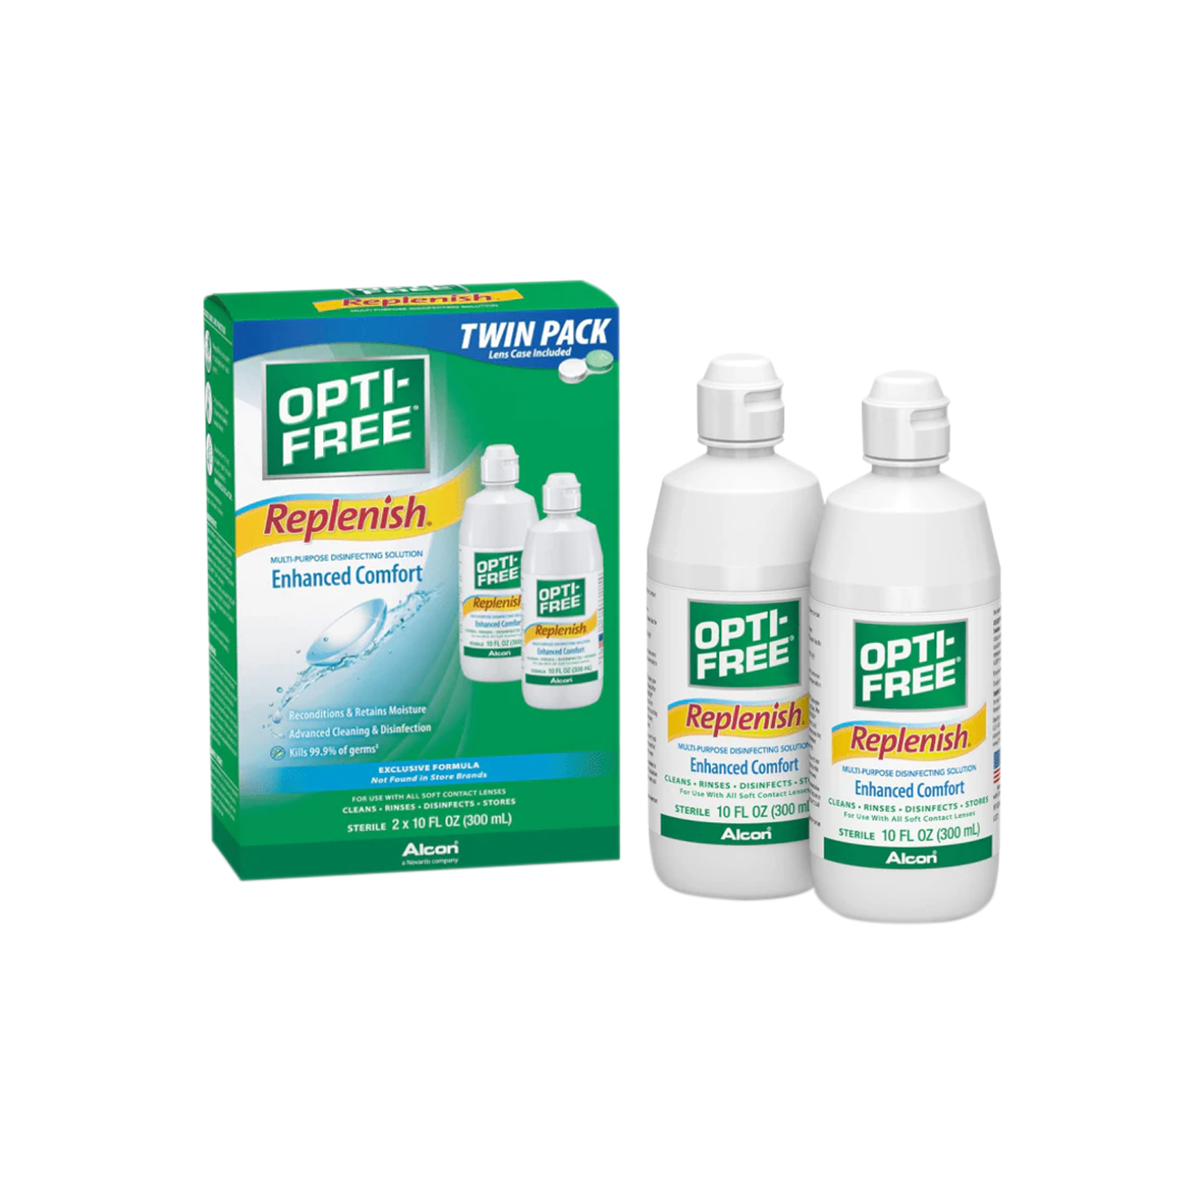 Opti-Free Replenish Multi-Purpose Disinfecting Solution with Lens Case, 20 Fl Oz (pack of 2)